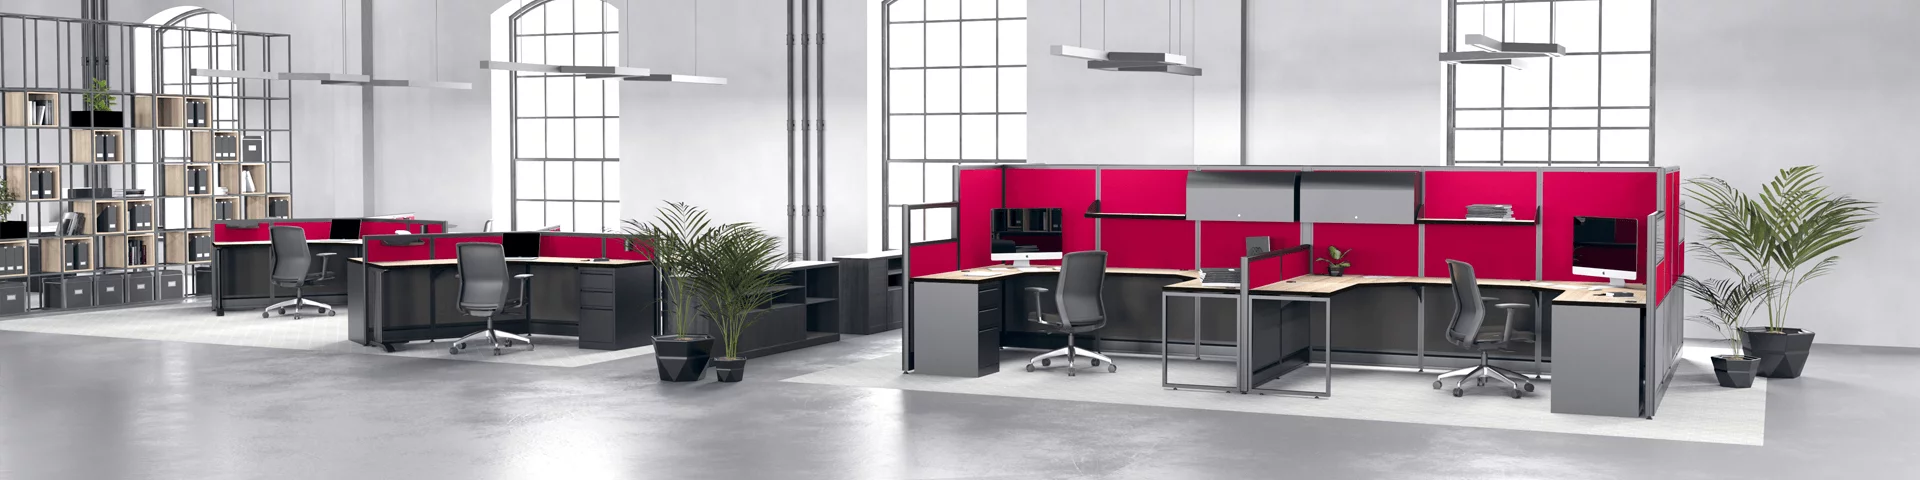 Office Cubicles for Sale from the Emerald Cubicle Collection